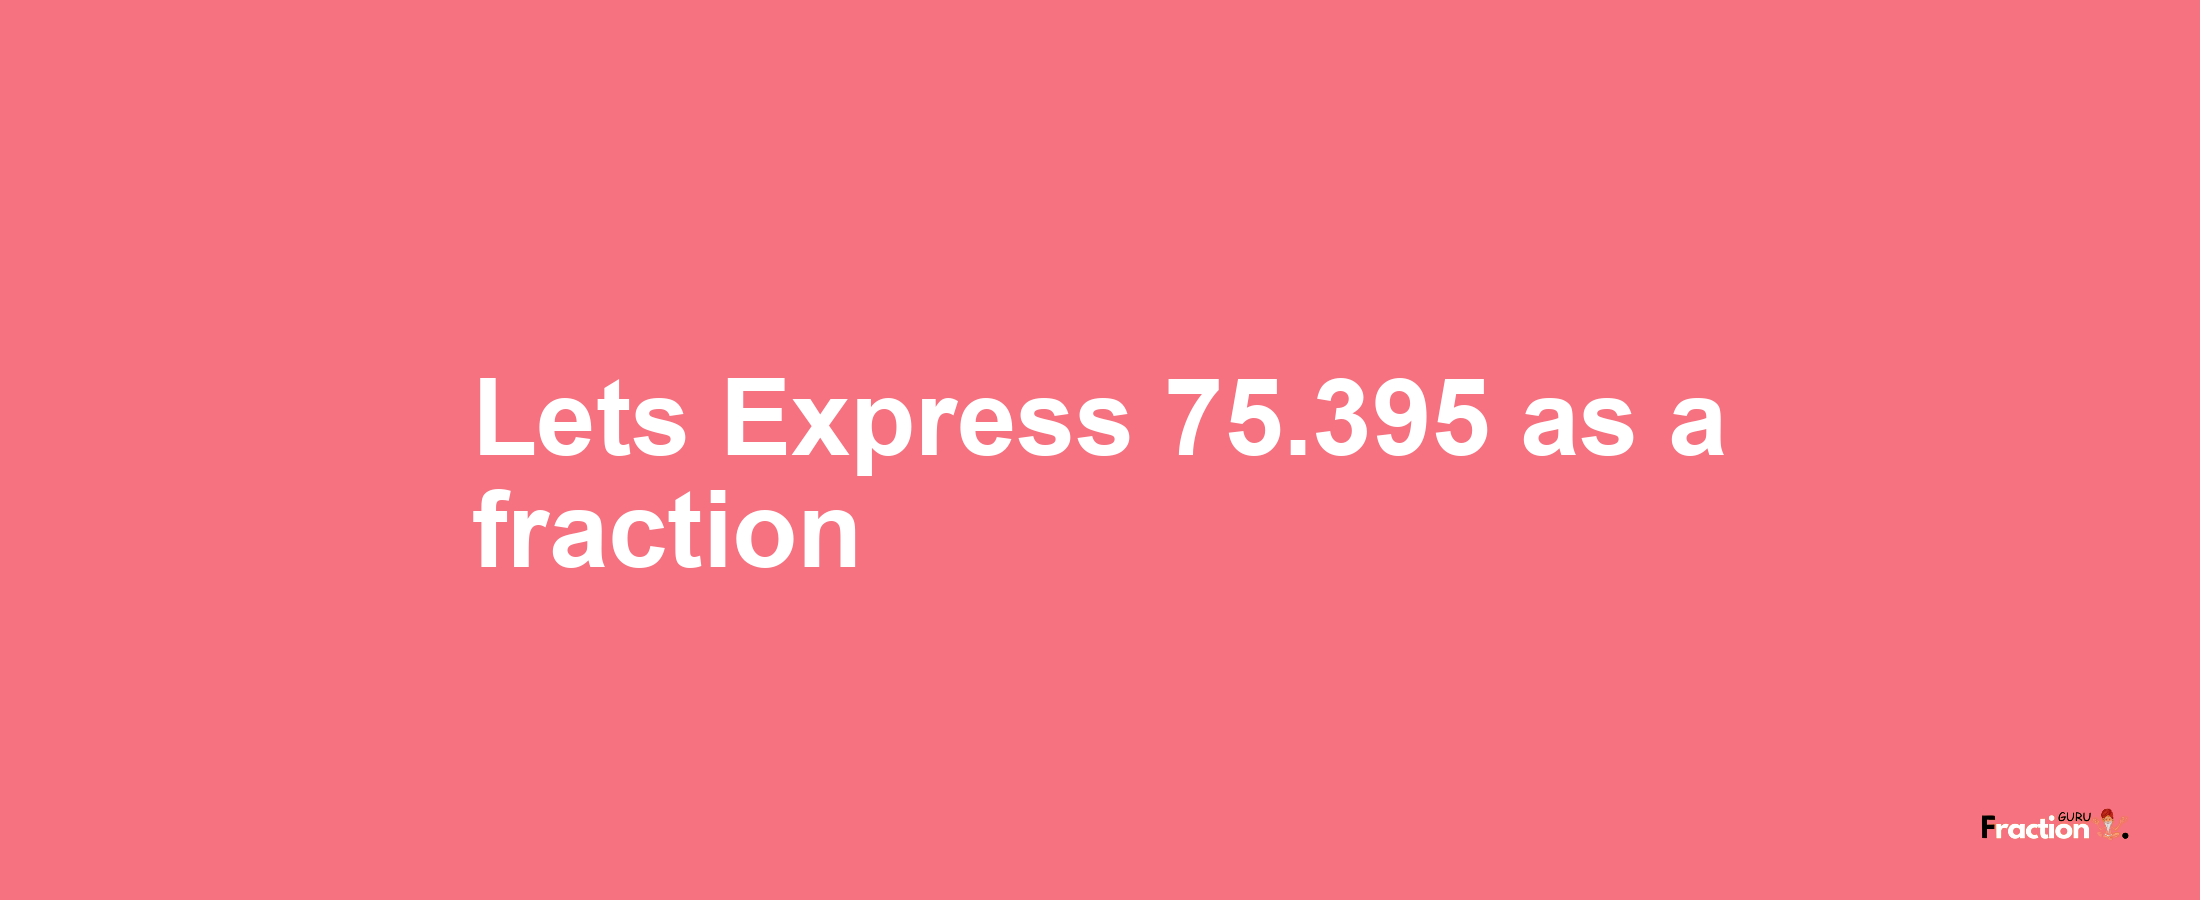 Lets Express 75.395 as afraction